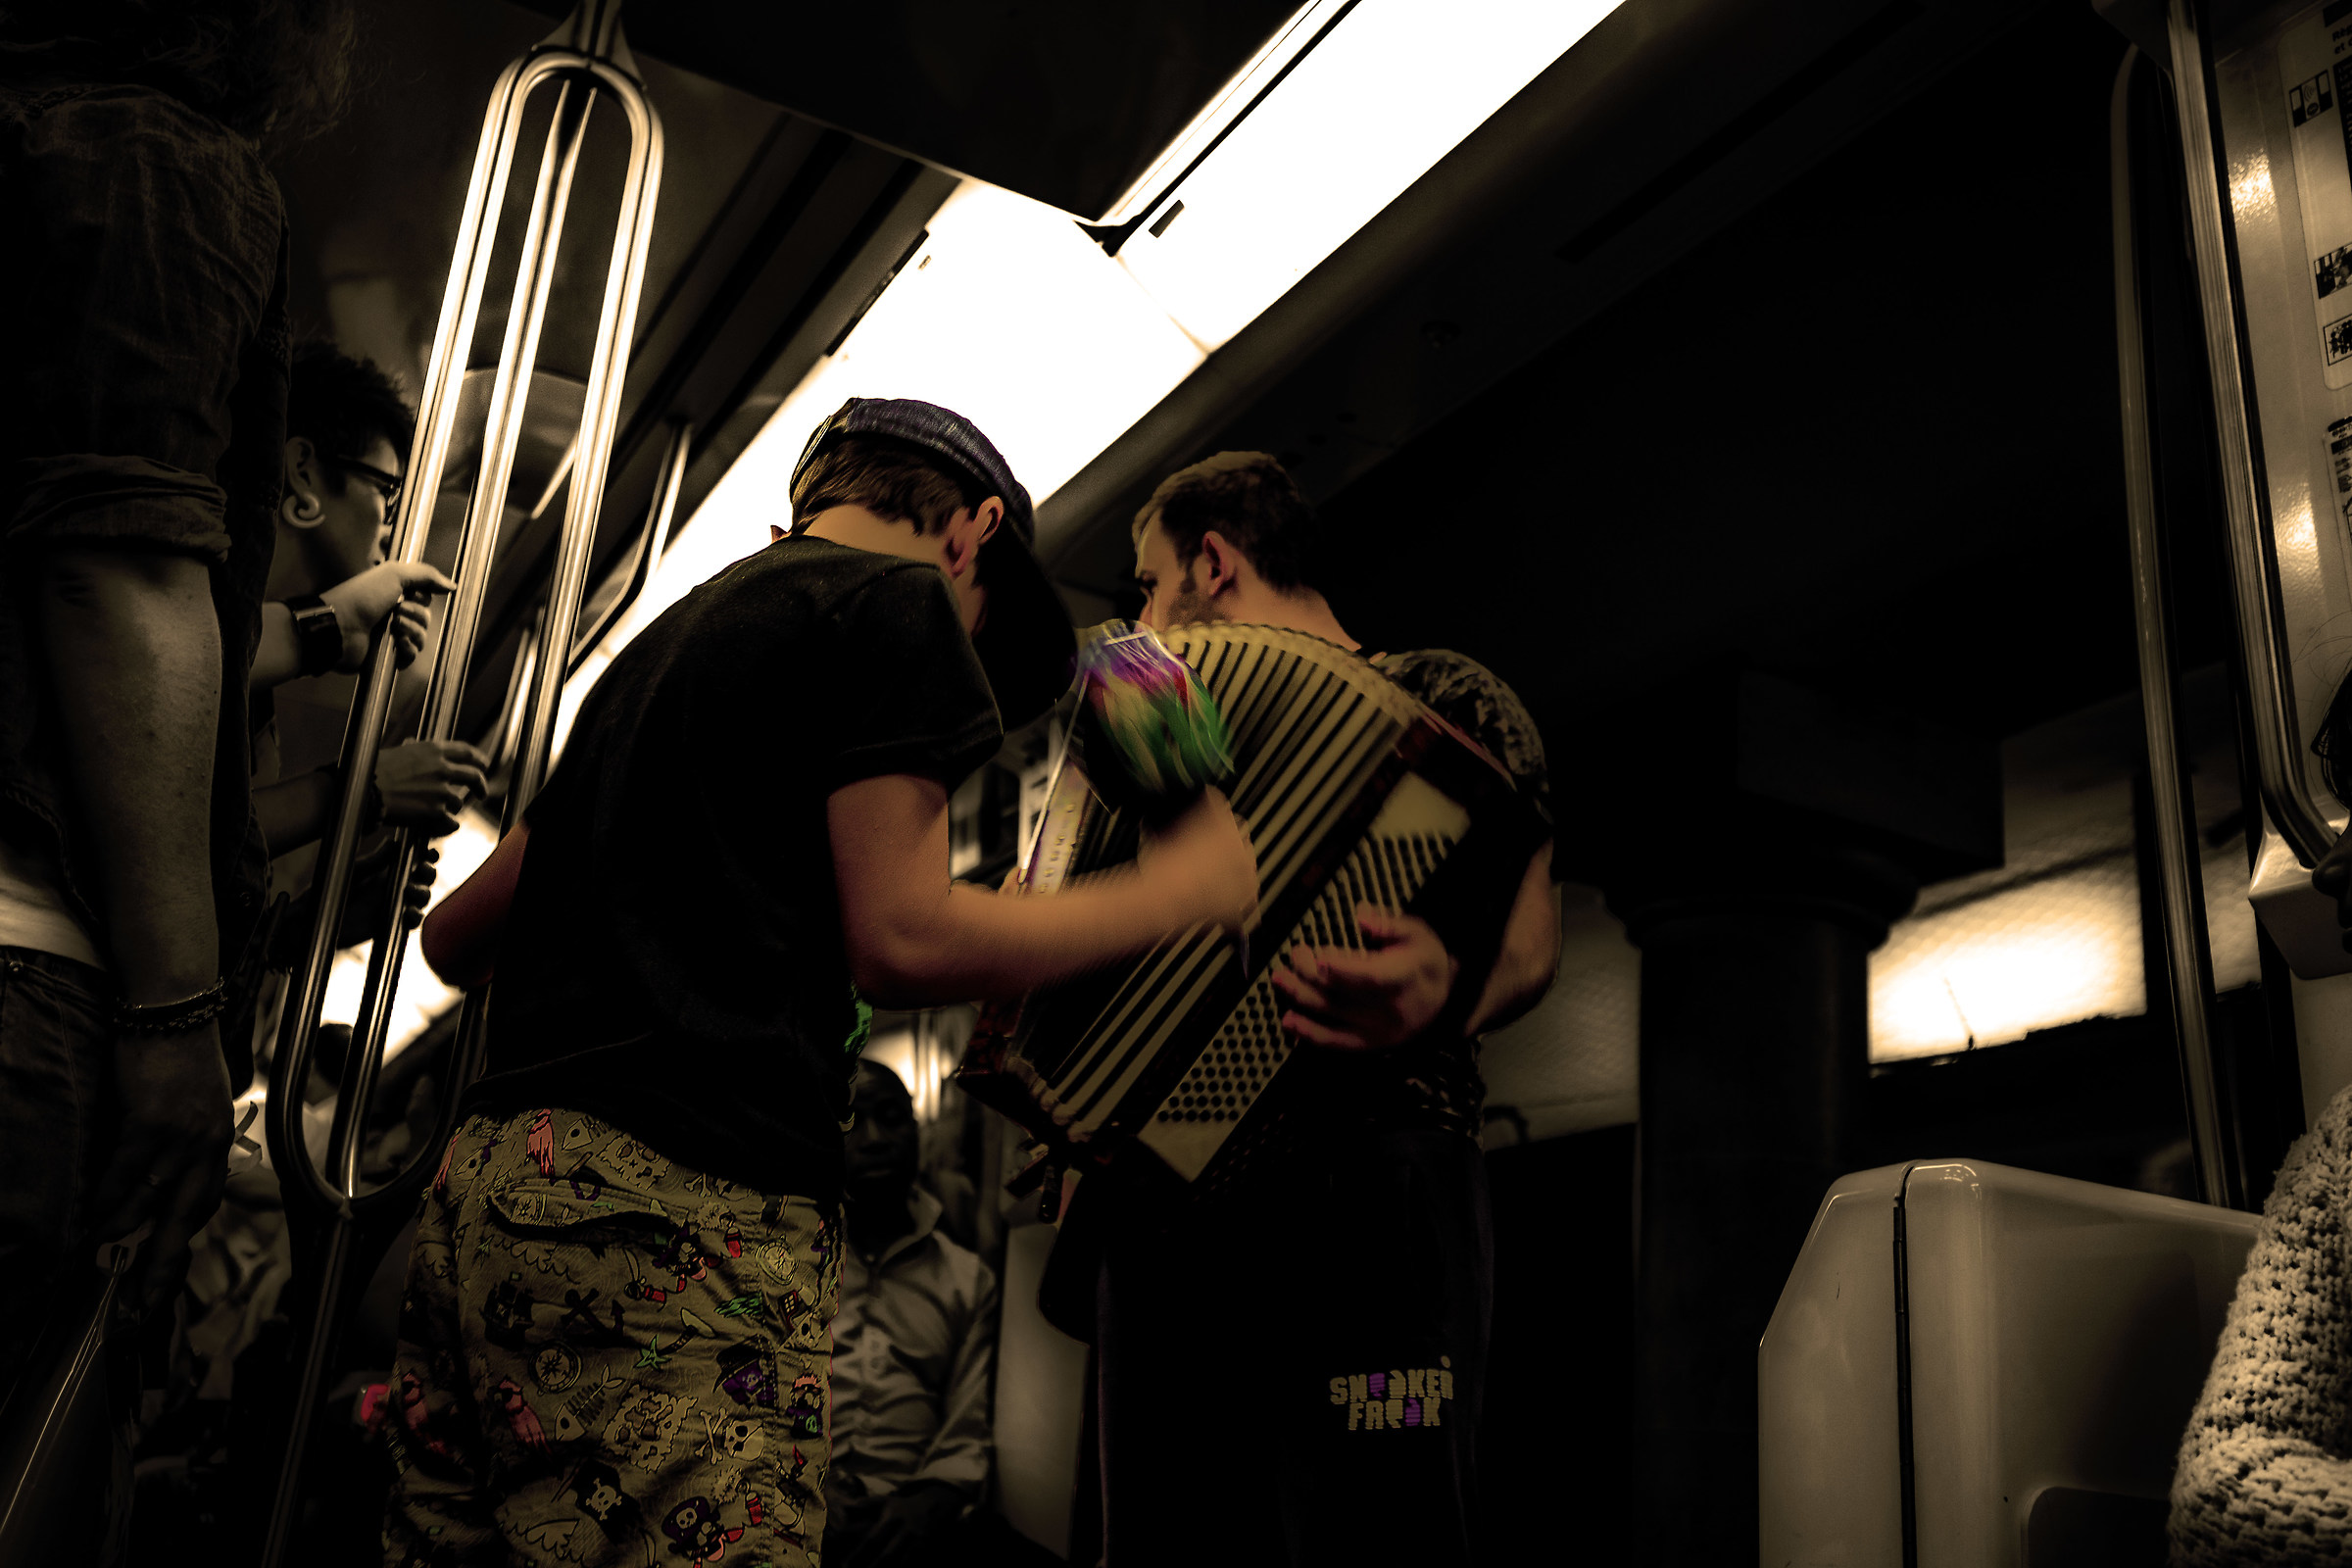 Musicians on the subway...